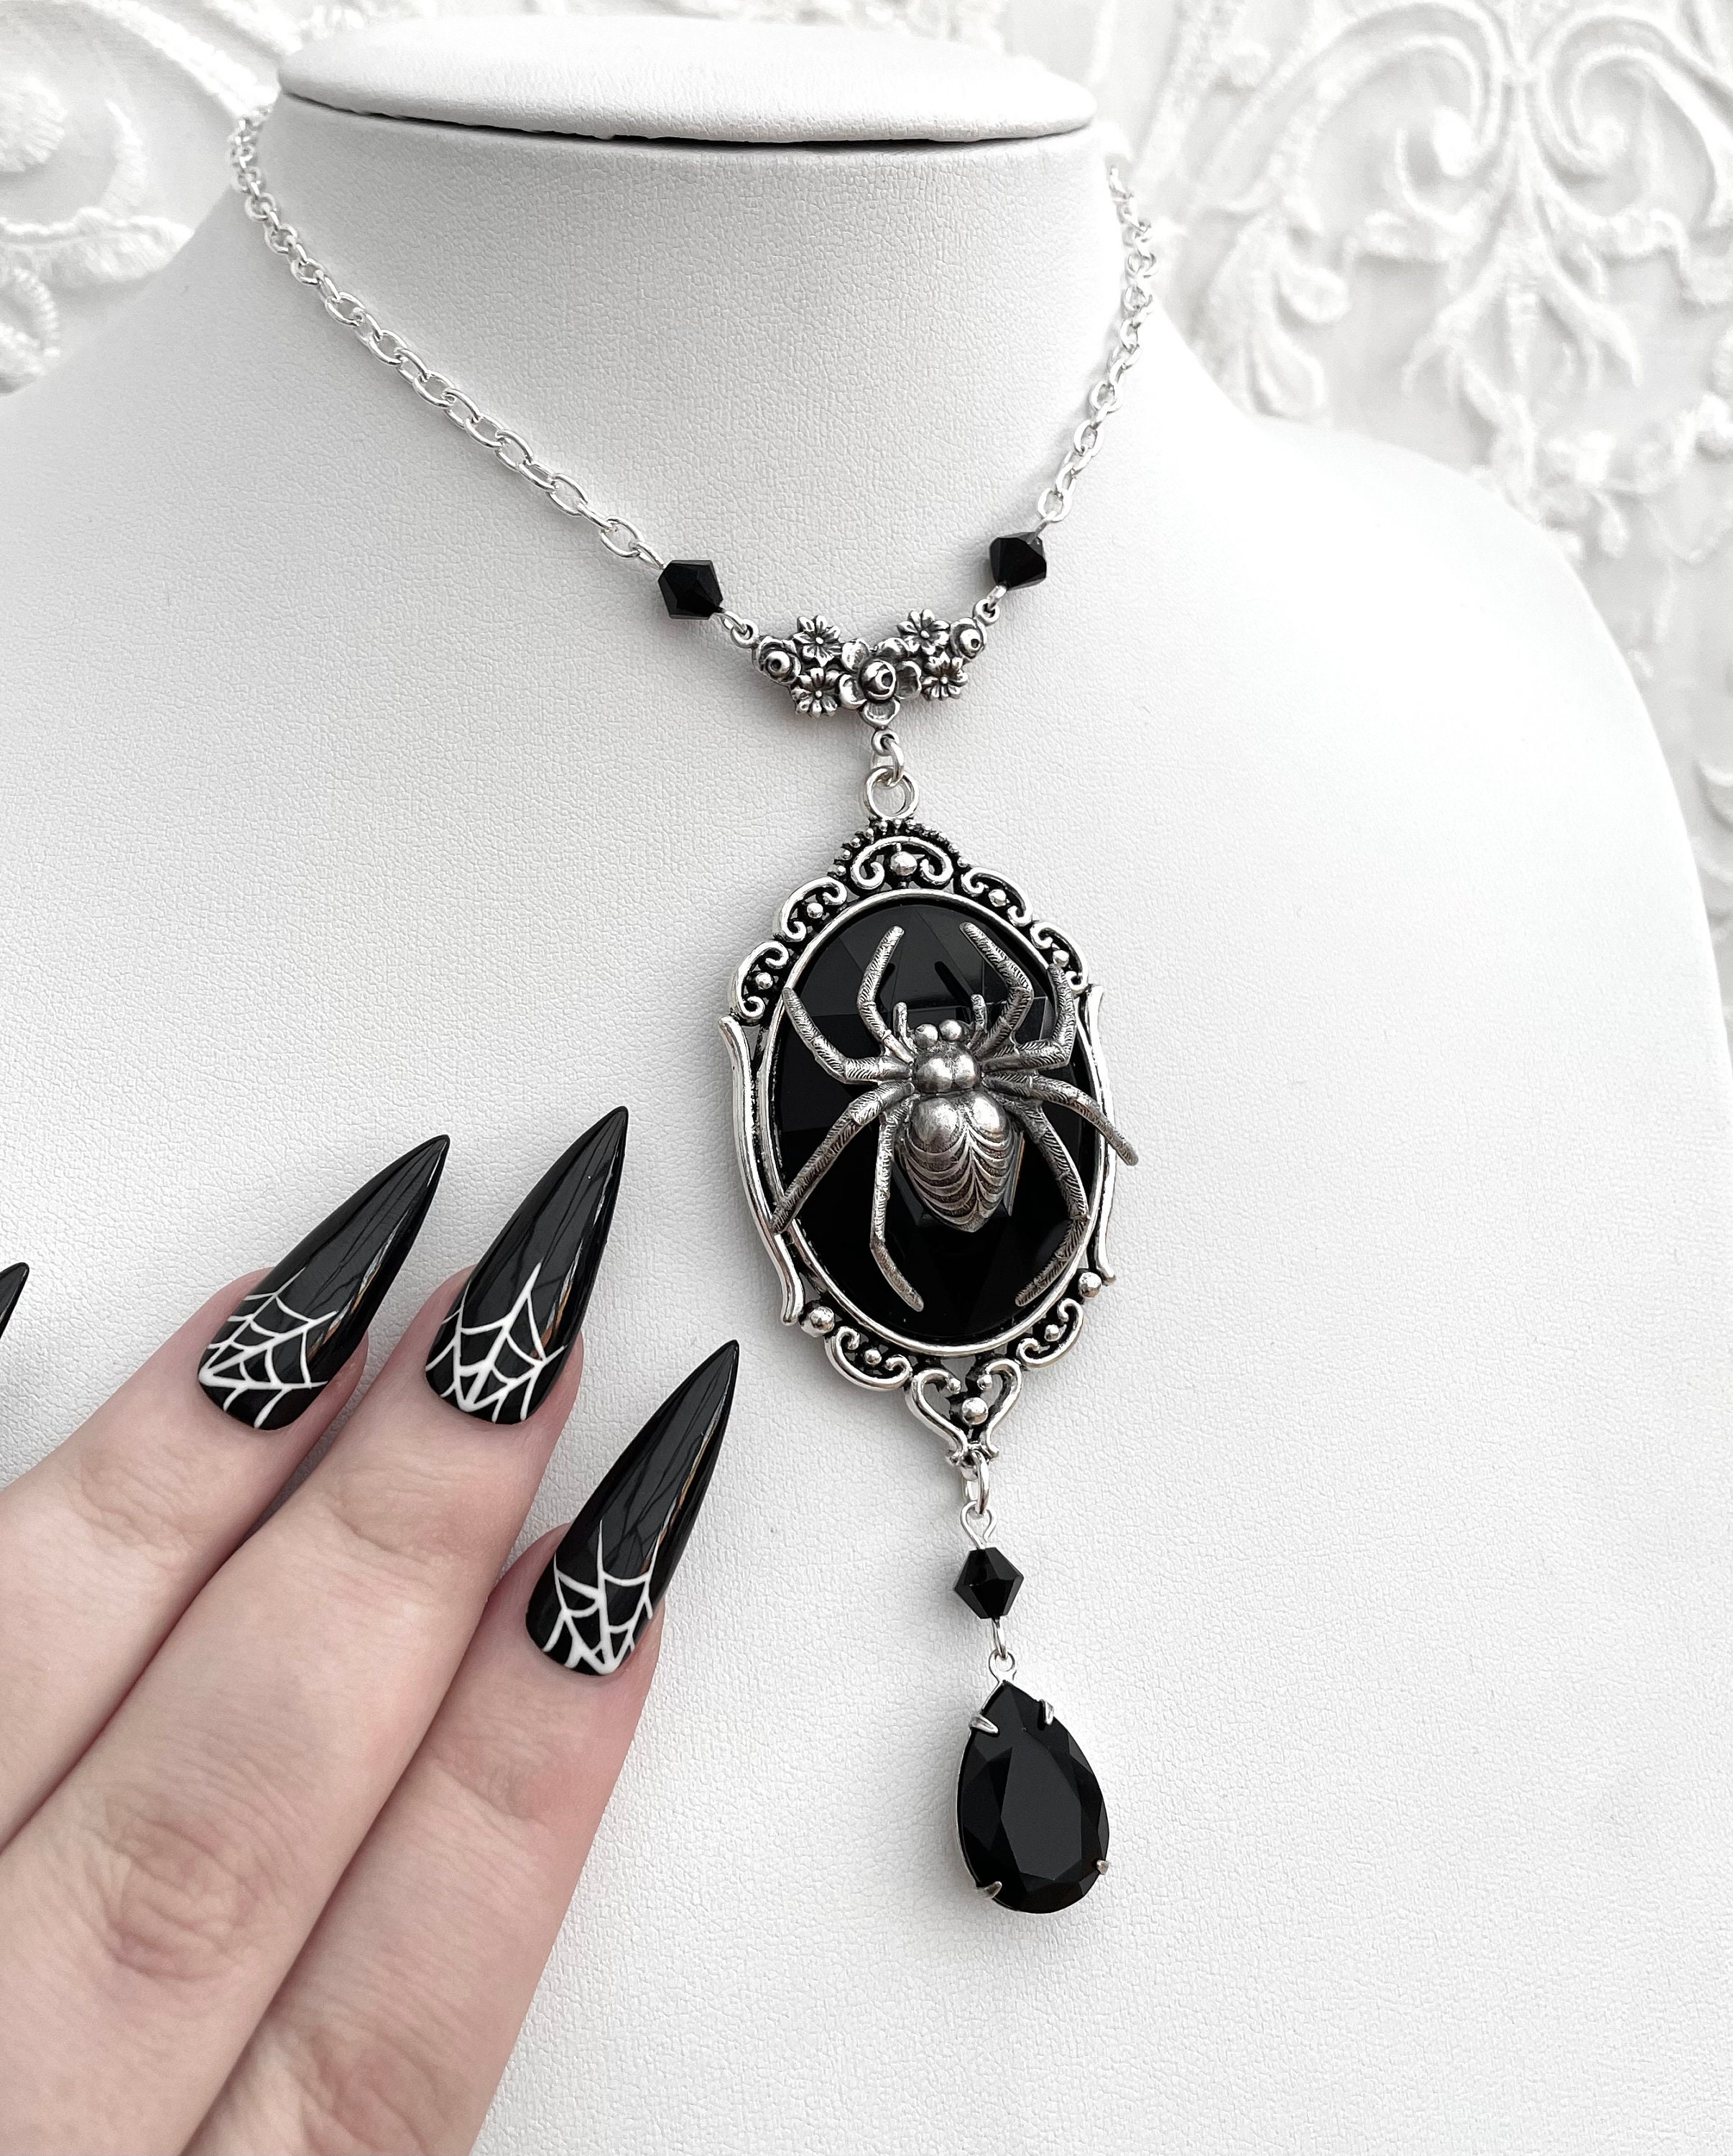 Vintage Hippy Stretch Tattoo Choker with Crystal Spider Pendant Necklace  for Women Elastic Circular Cobwebbing Halloween Jewelry